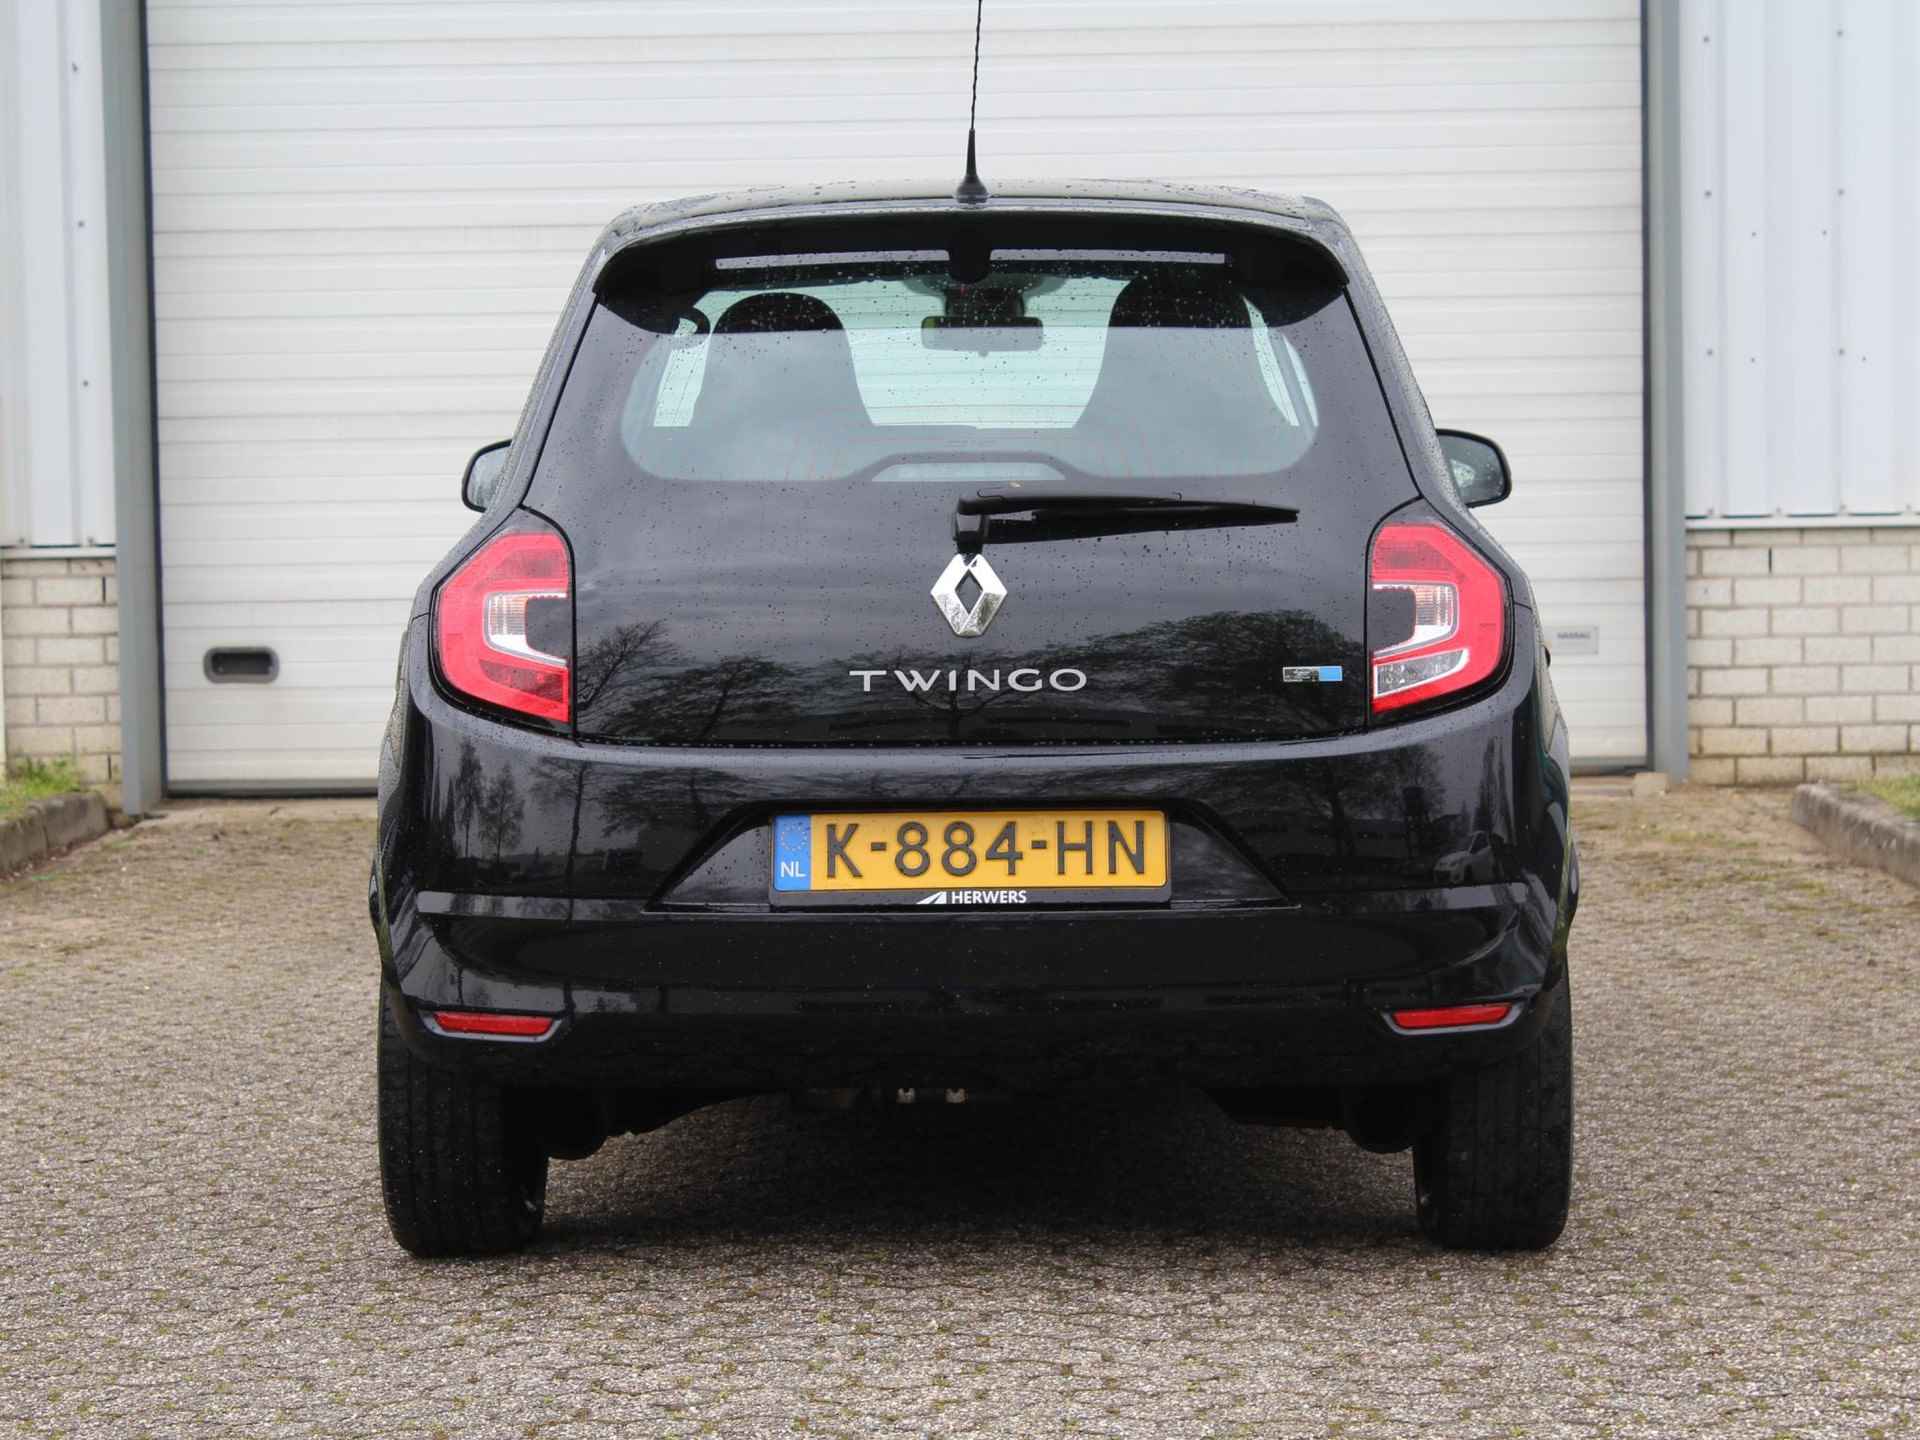 Renault Twingo Z.E. R80 Collection / SUBSIDIE  € 2000,- mogelijk / AUTOMAAT / Navigatiesysteem / Airco / Apple Car Play & Android Auto / DAB / Led dagrijverlichting / Metaalkleur / Cruise control - 30/47